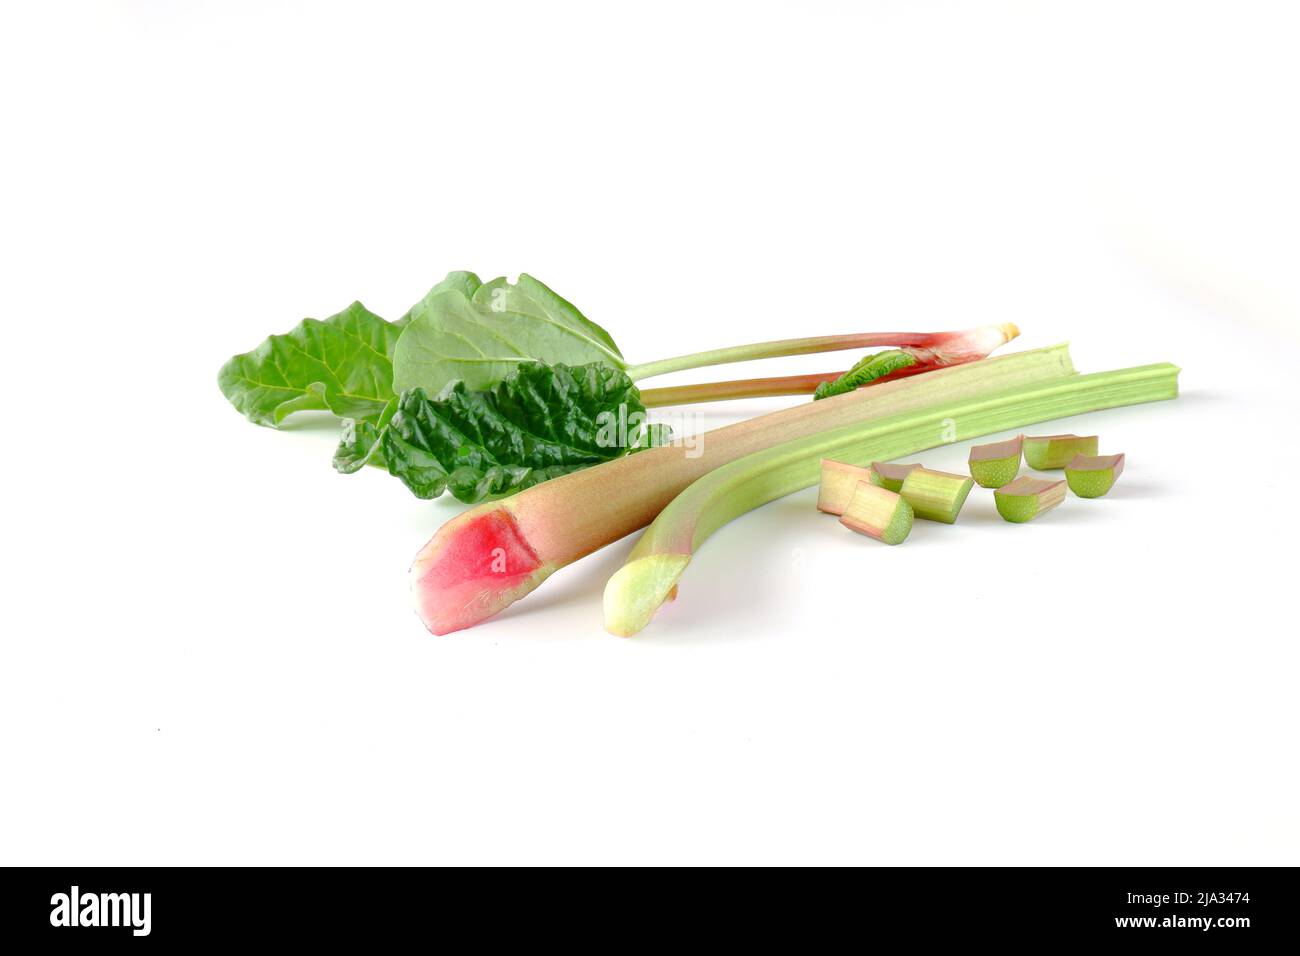 Red and green rhubarb stalks with leaves, rhubarb pieces isolated on a white background. Fresh useful plant from the garden. Stock Photo